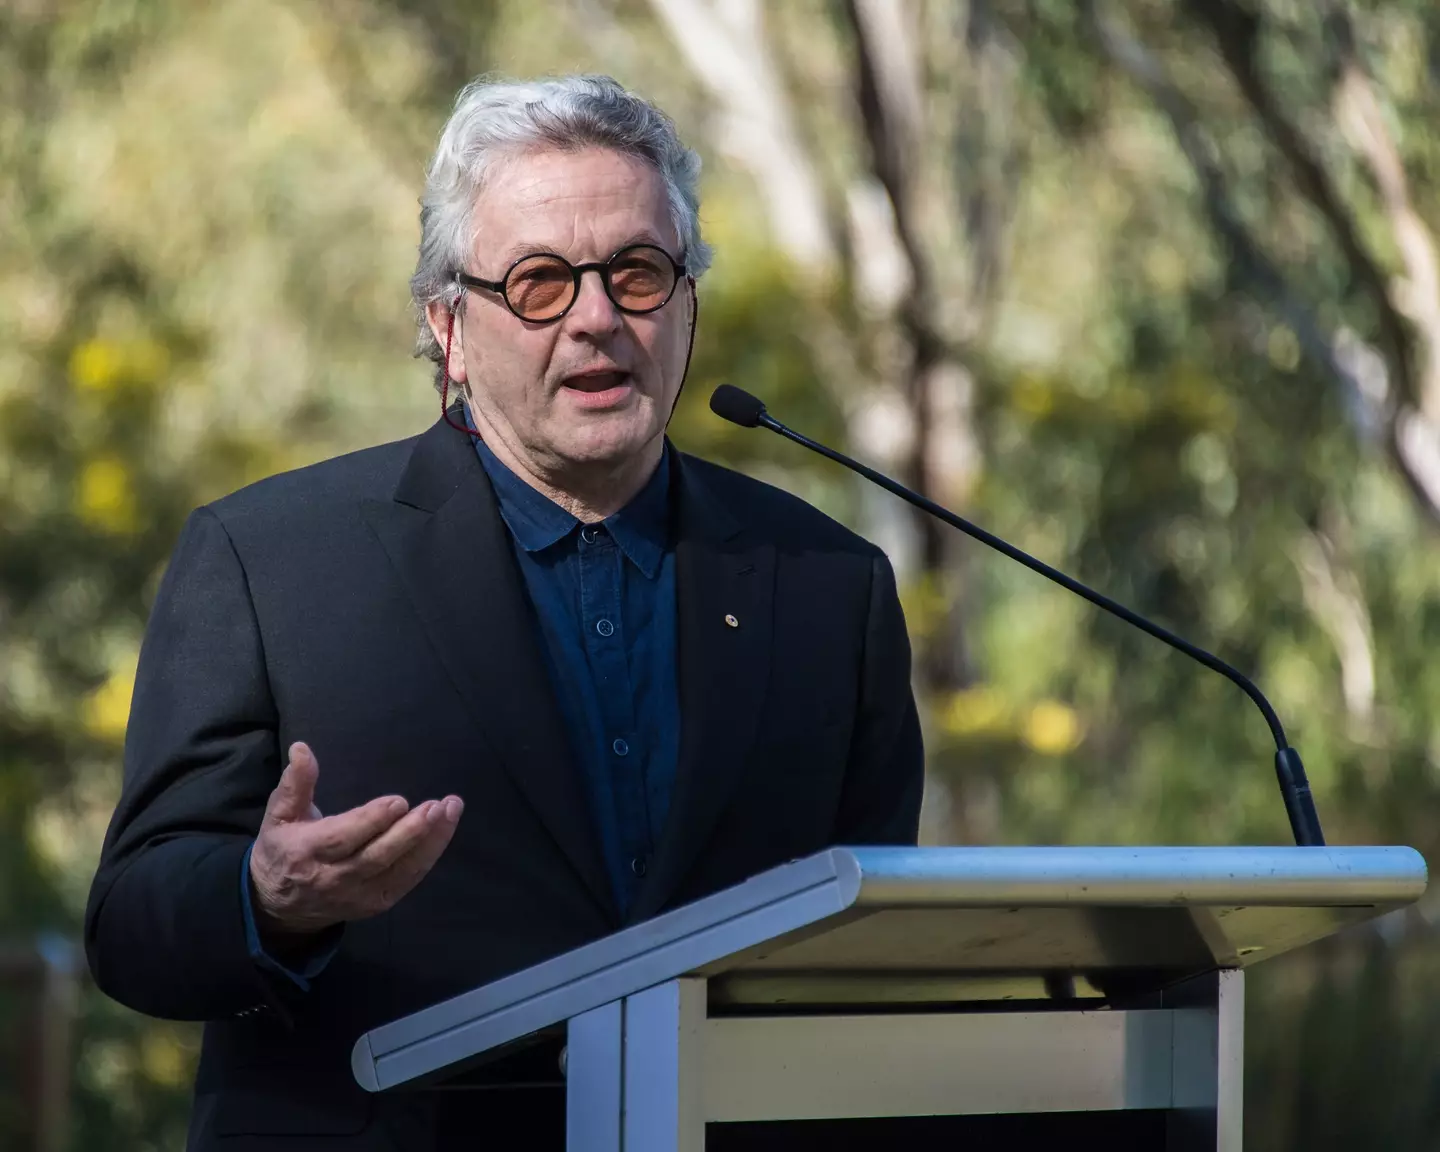 Director George Miller has weighed in on the on-set drama (Hugh Peterswald/Pacific Press/LightRocket via Getty Images) 